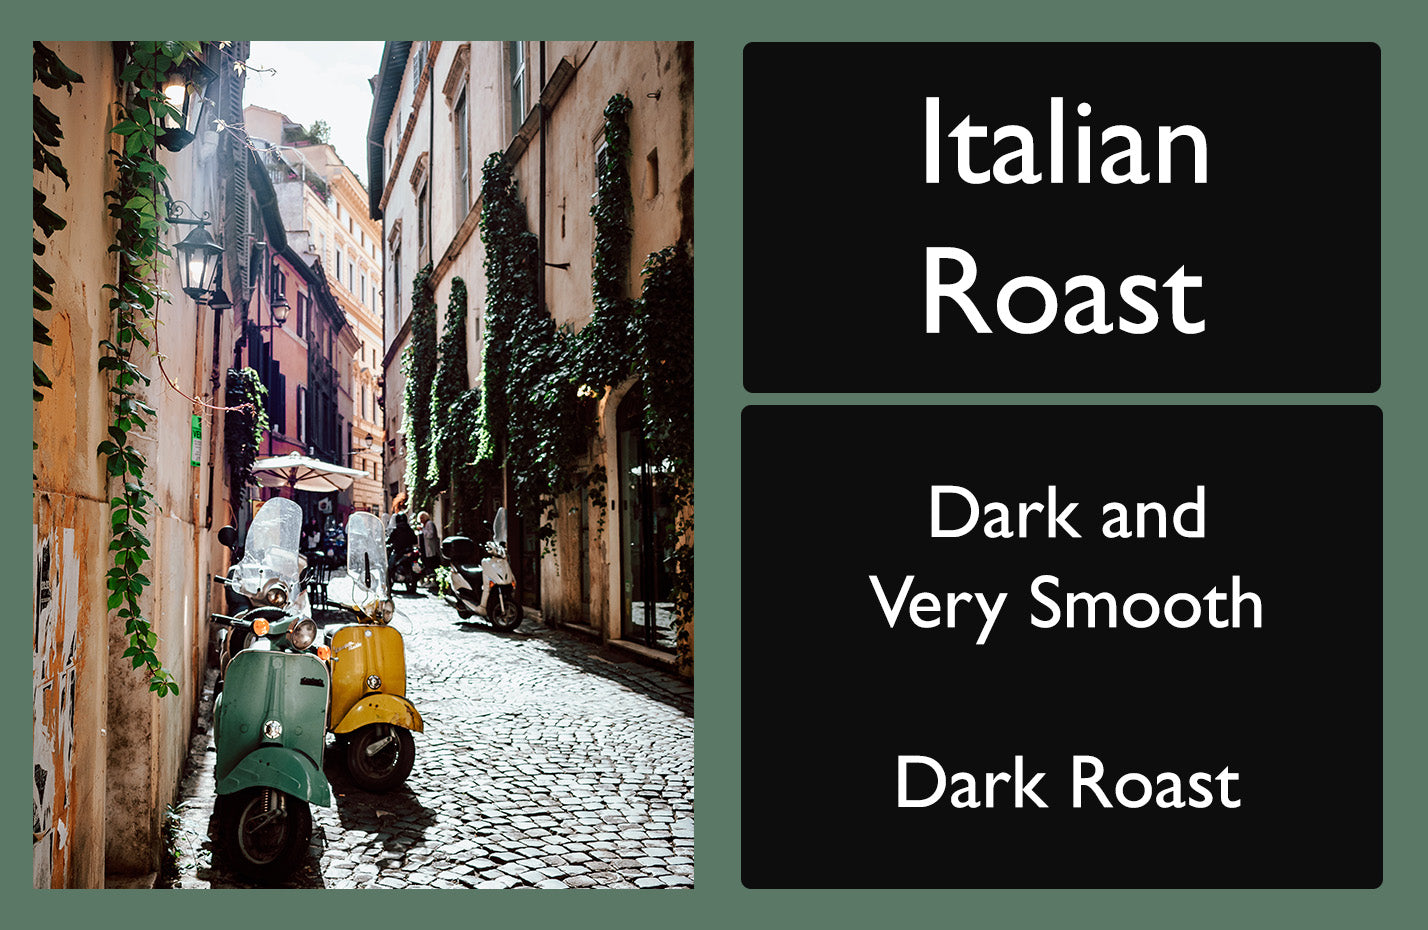 Picture of a bag of Italian Roast Coffee